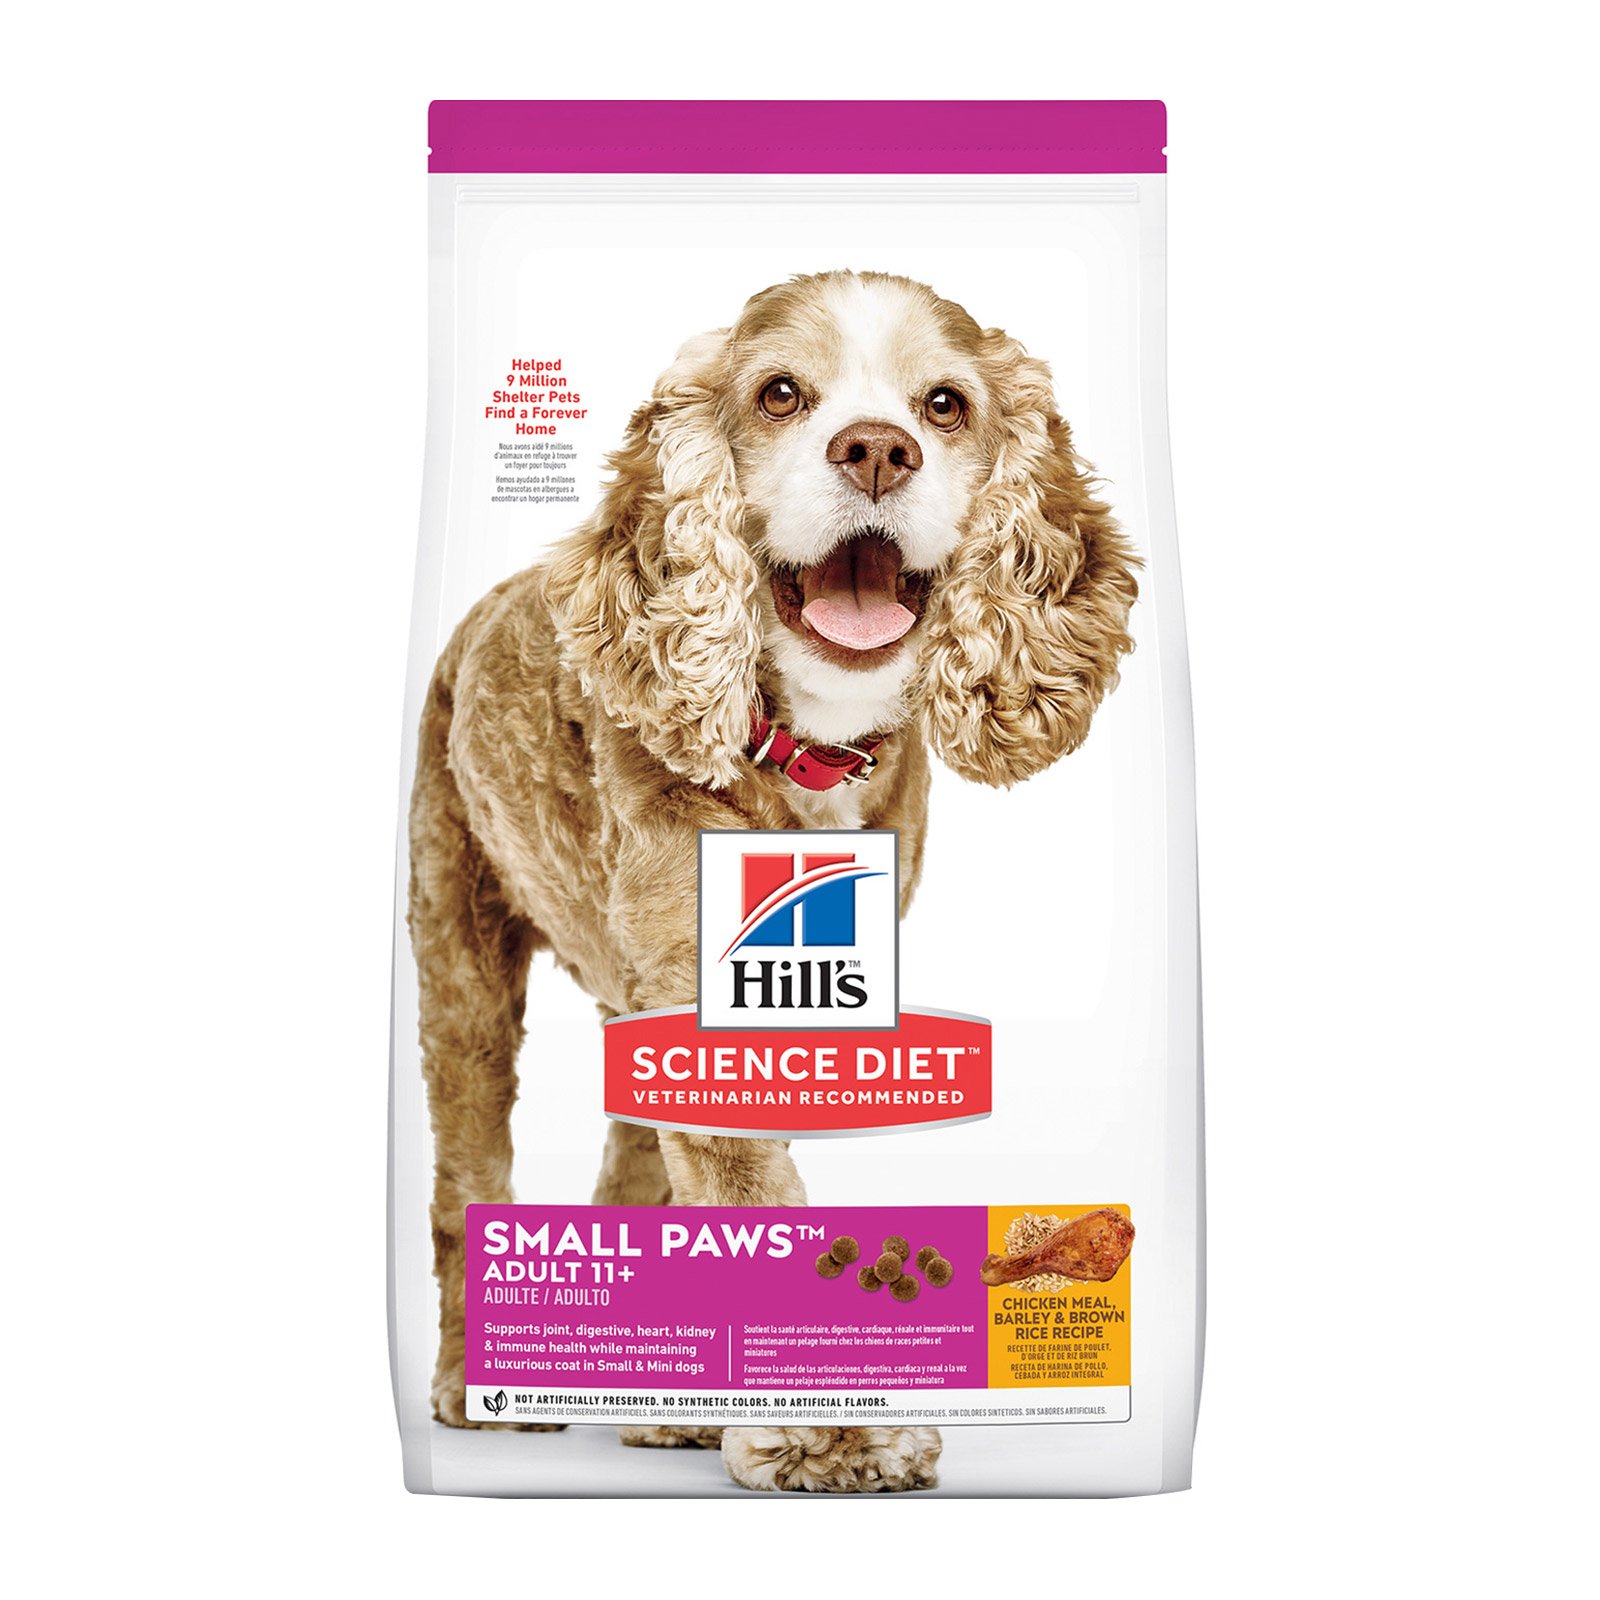 Hill's Science Diet Adult 11+ Small Paws Chicken, Barley & Rice Dry Dog Food   2.04 Kg